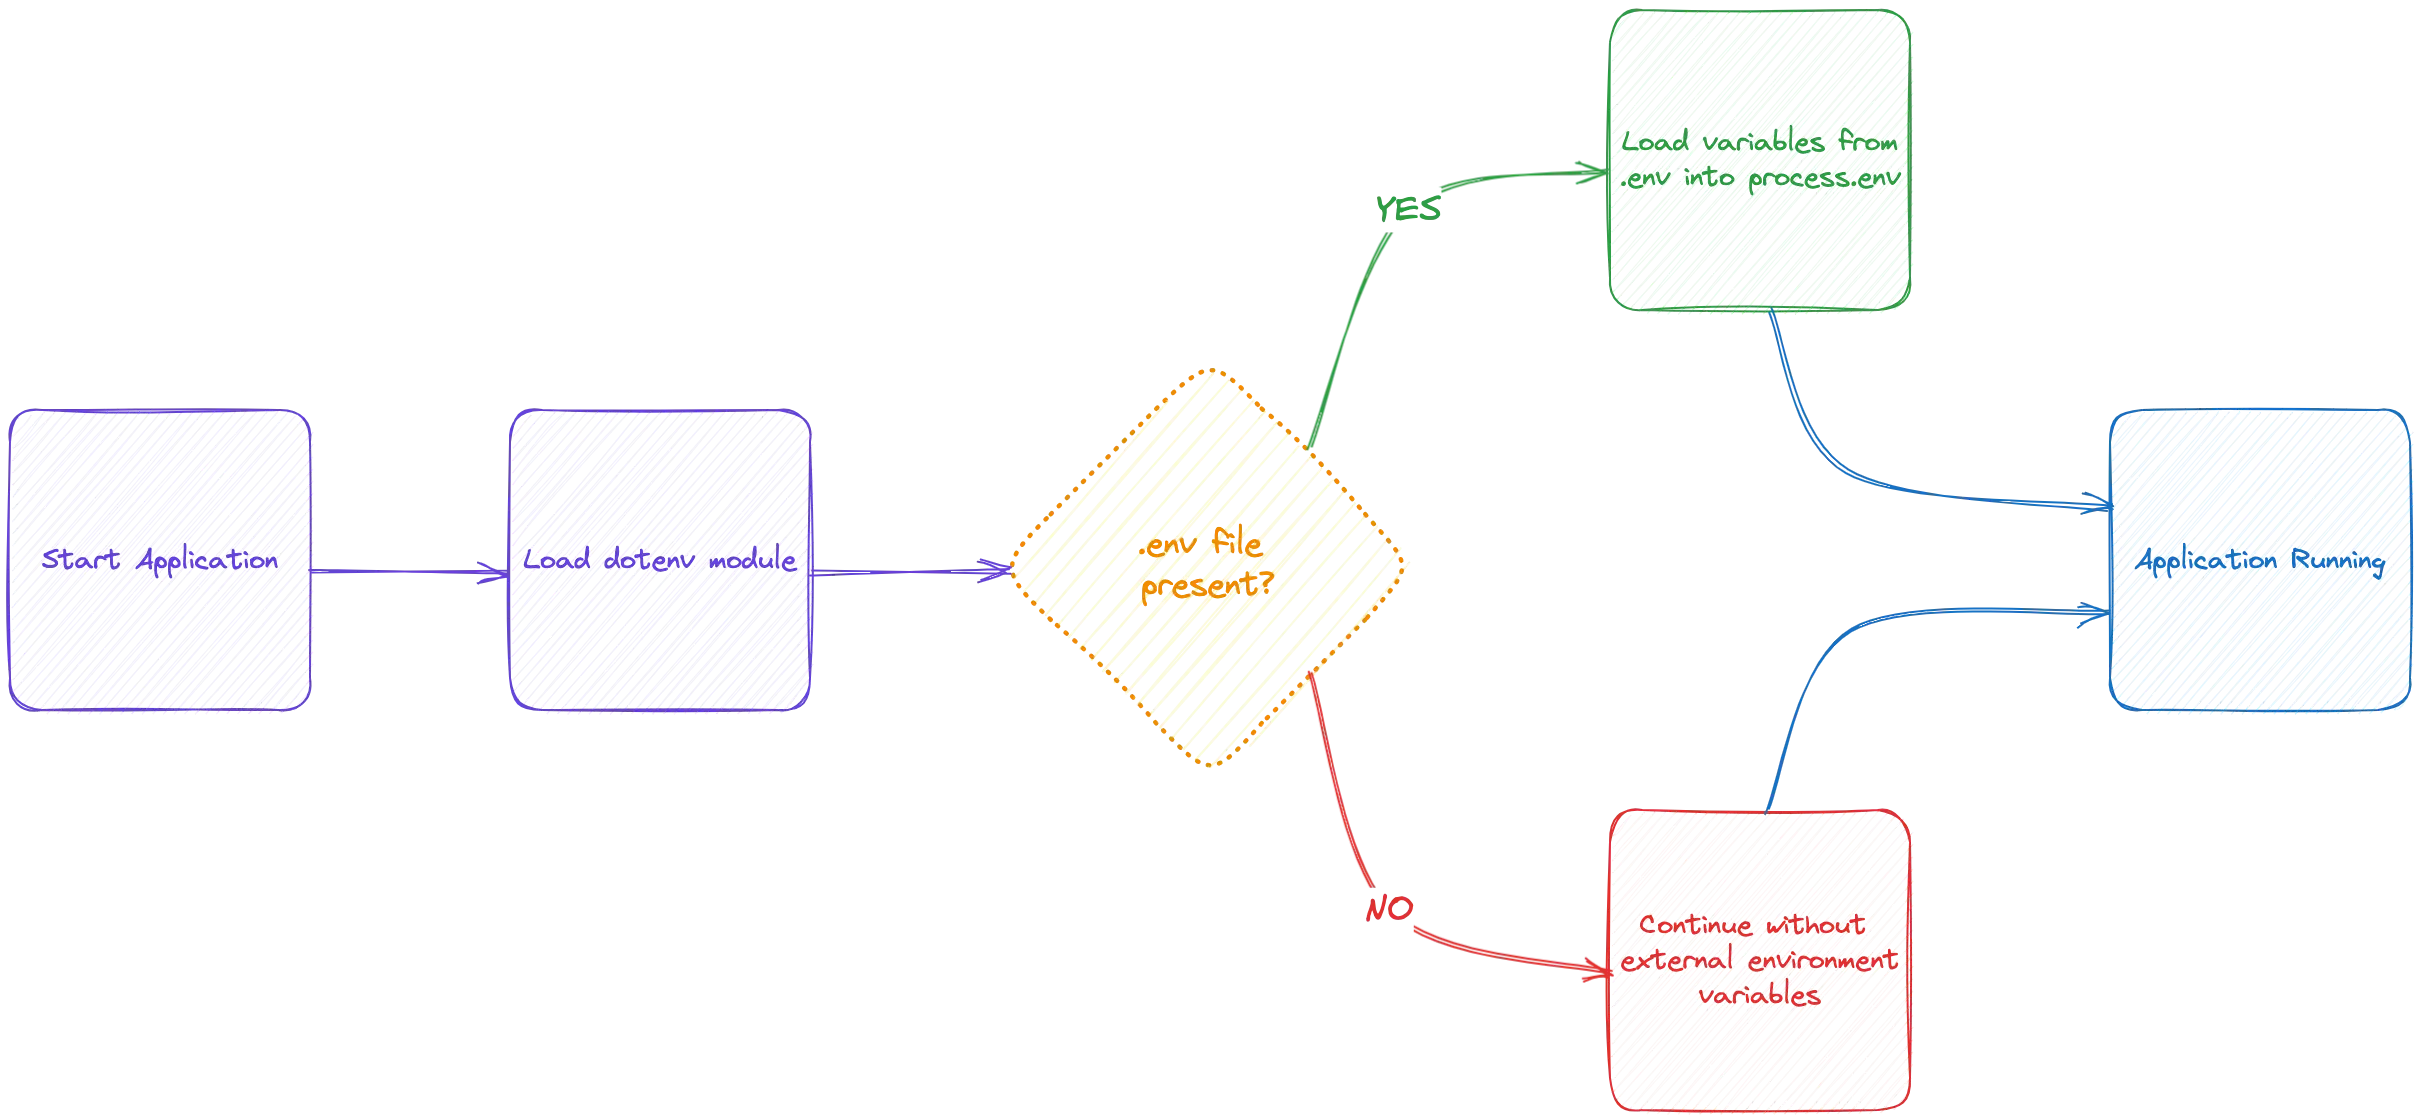 Diagram showcasing how environment variables are loaded using dotenv package